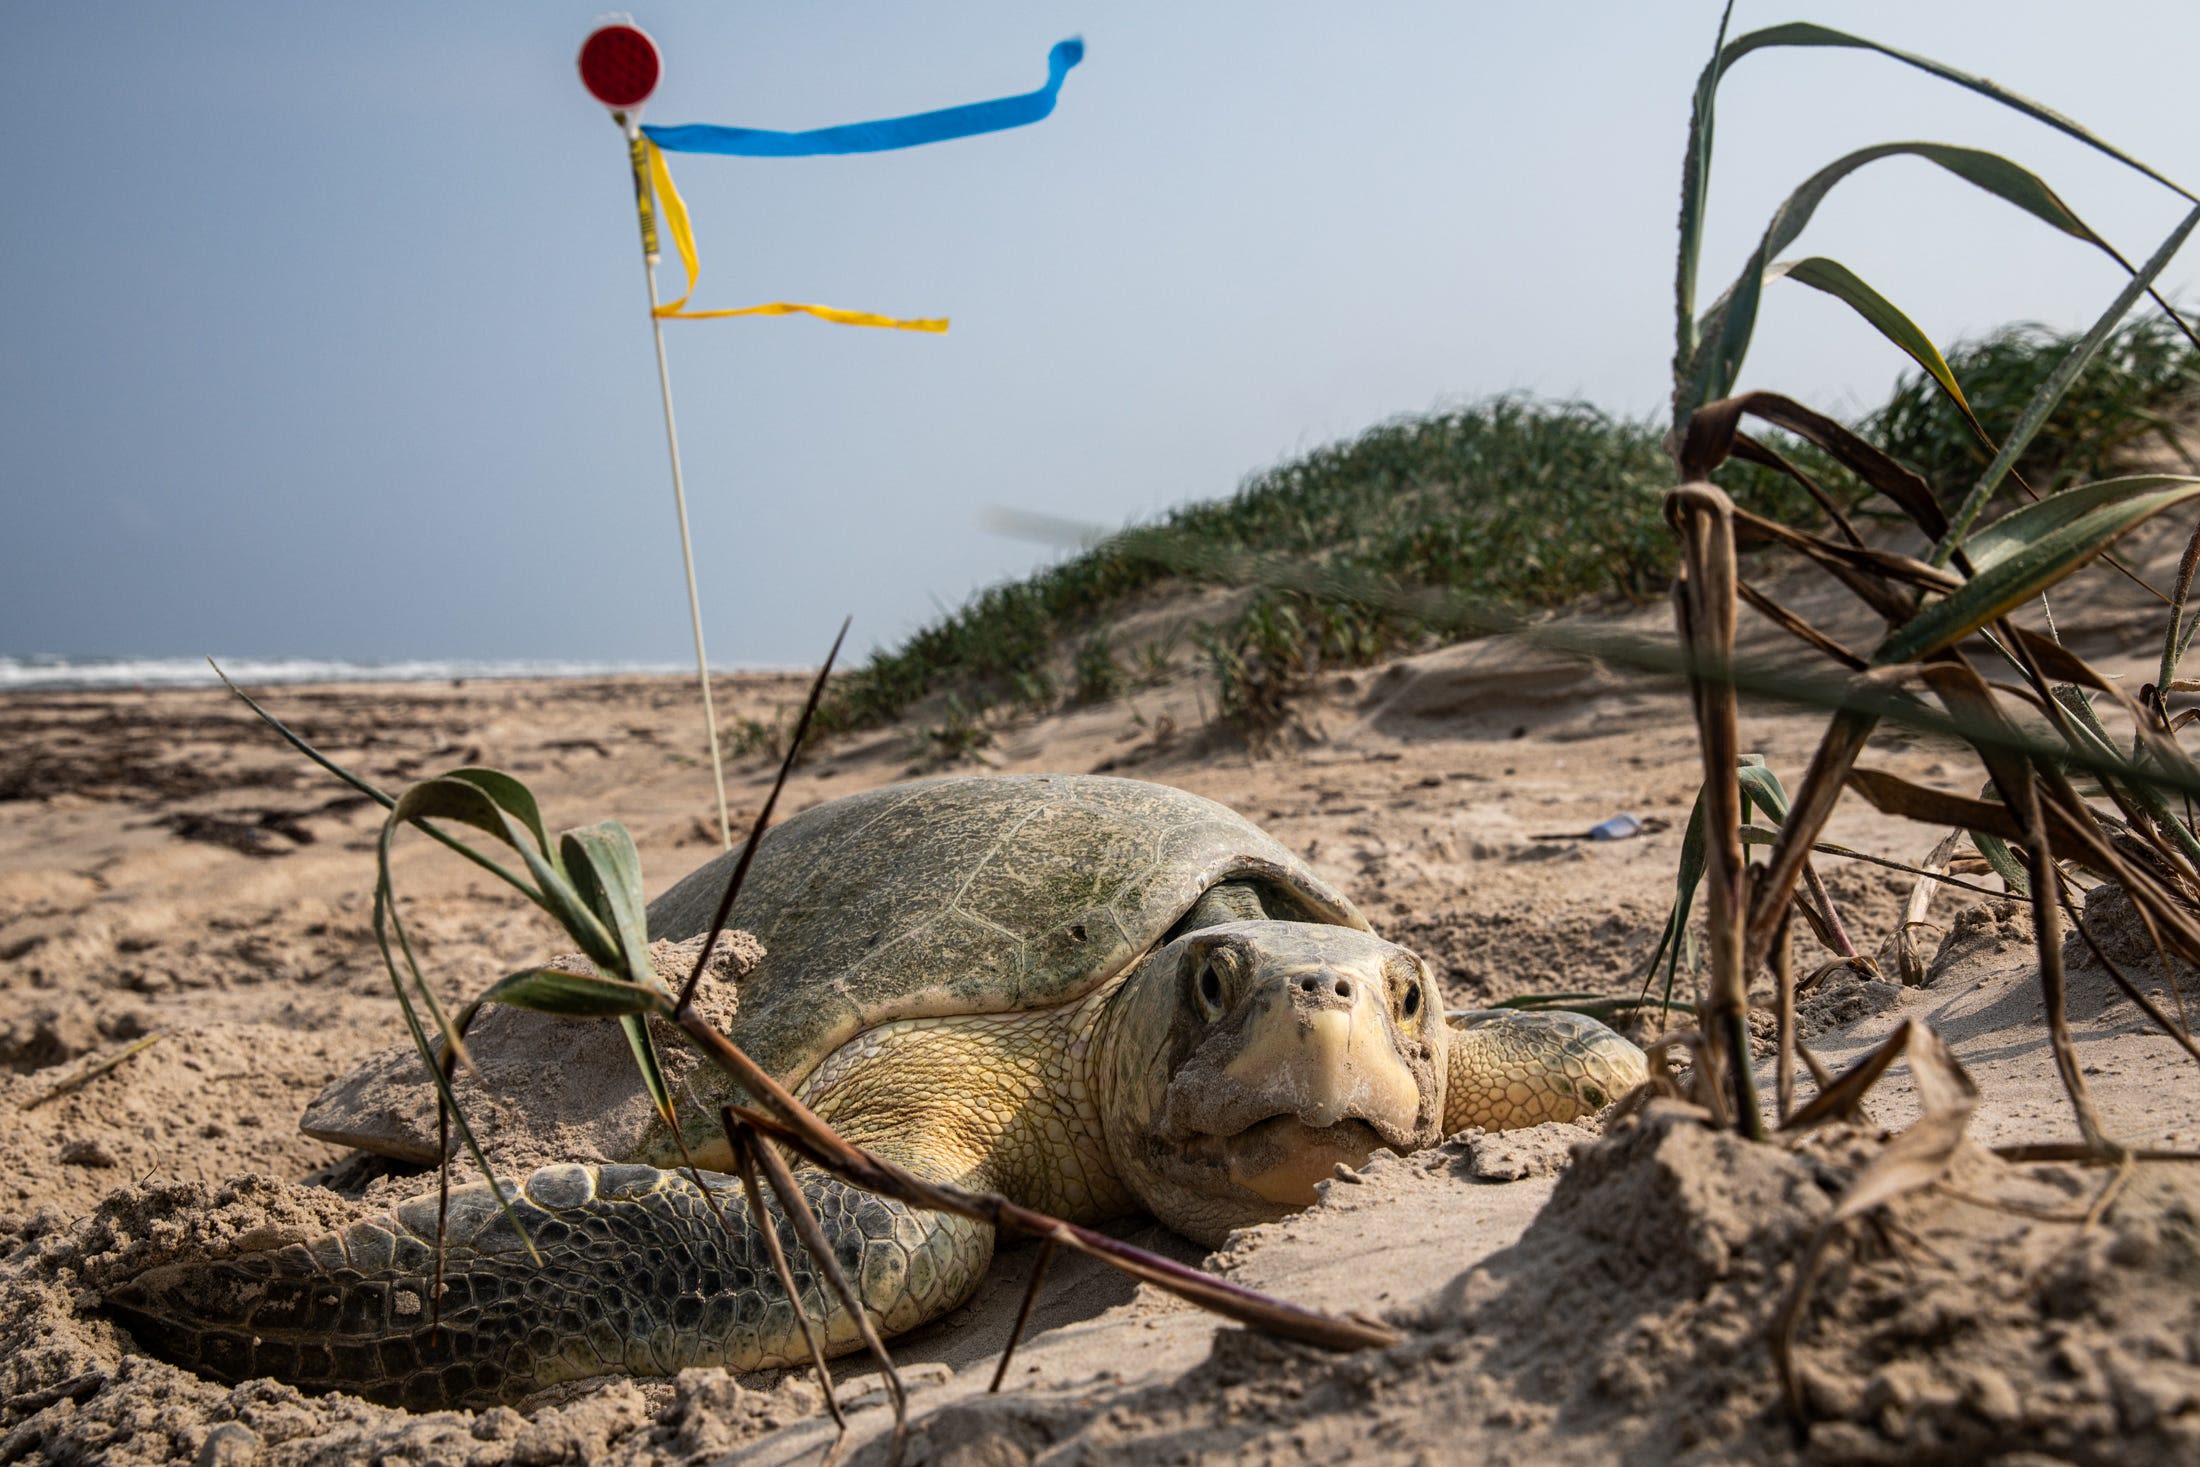 'It's our sea turtle': A look at the history of Kemp's ridley recovery, ongoing threats